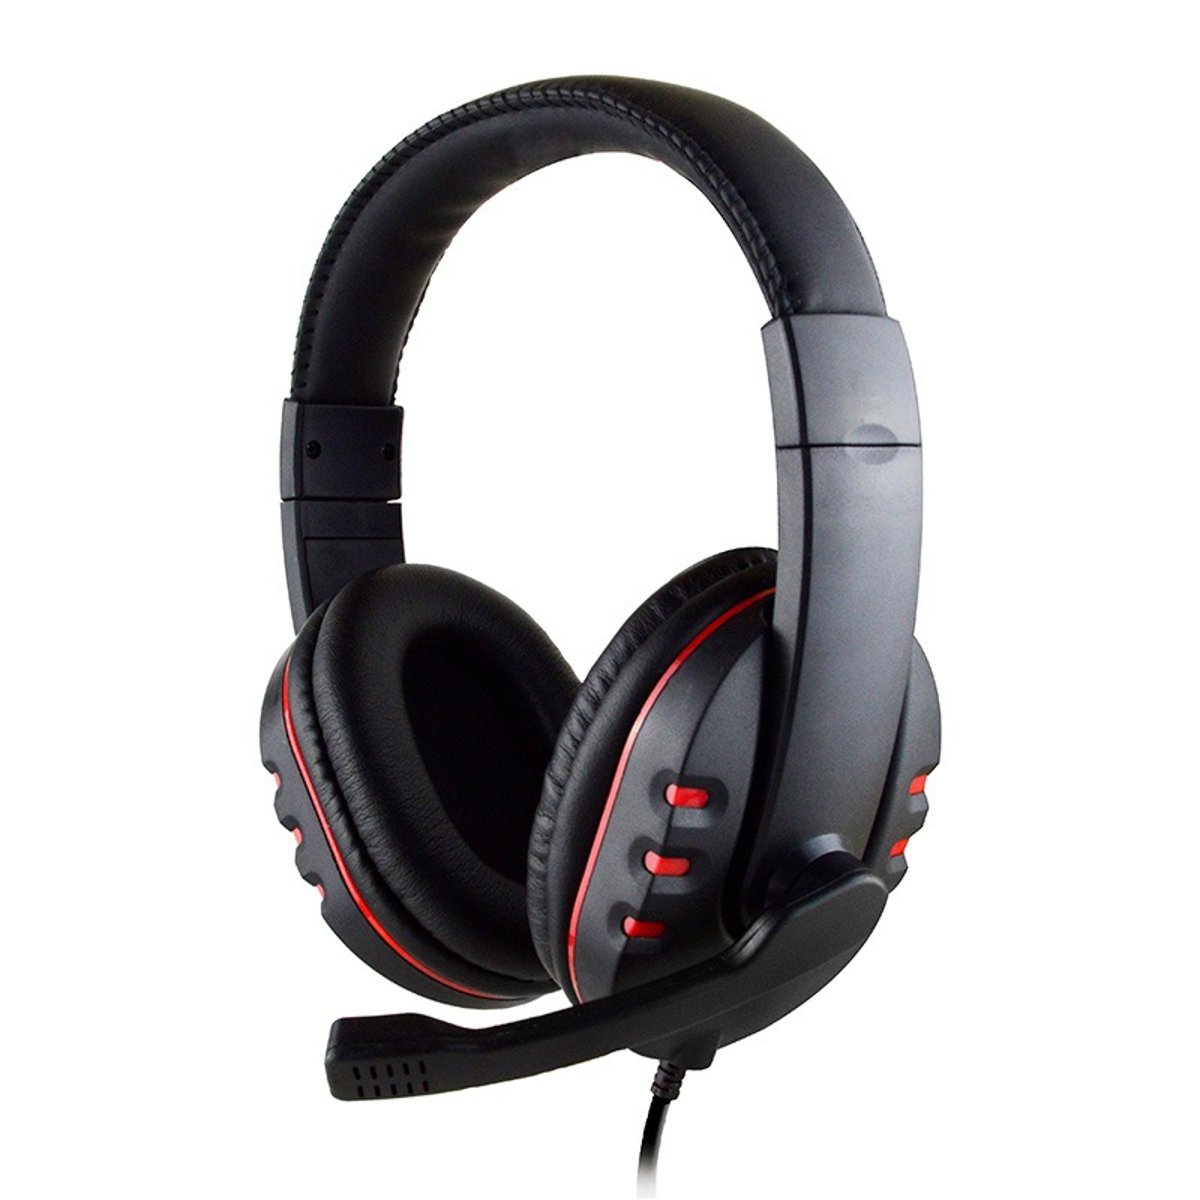 Portable-Gaming-Headset-35mm-Stereo-Surround-Gamer-Wired-Headphone-With-Mic-for-PC-Computer-PS4-Xbox-1699413-3